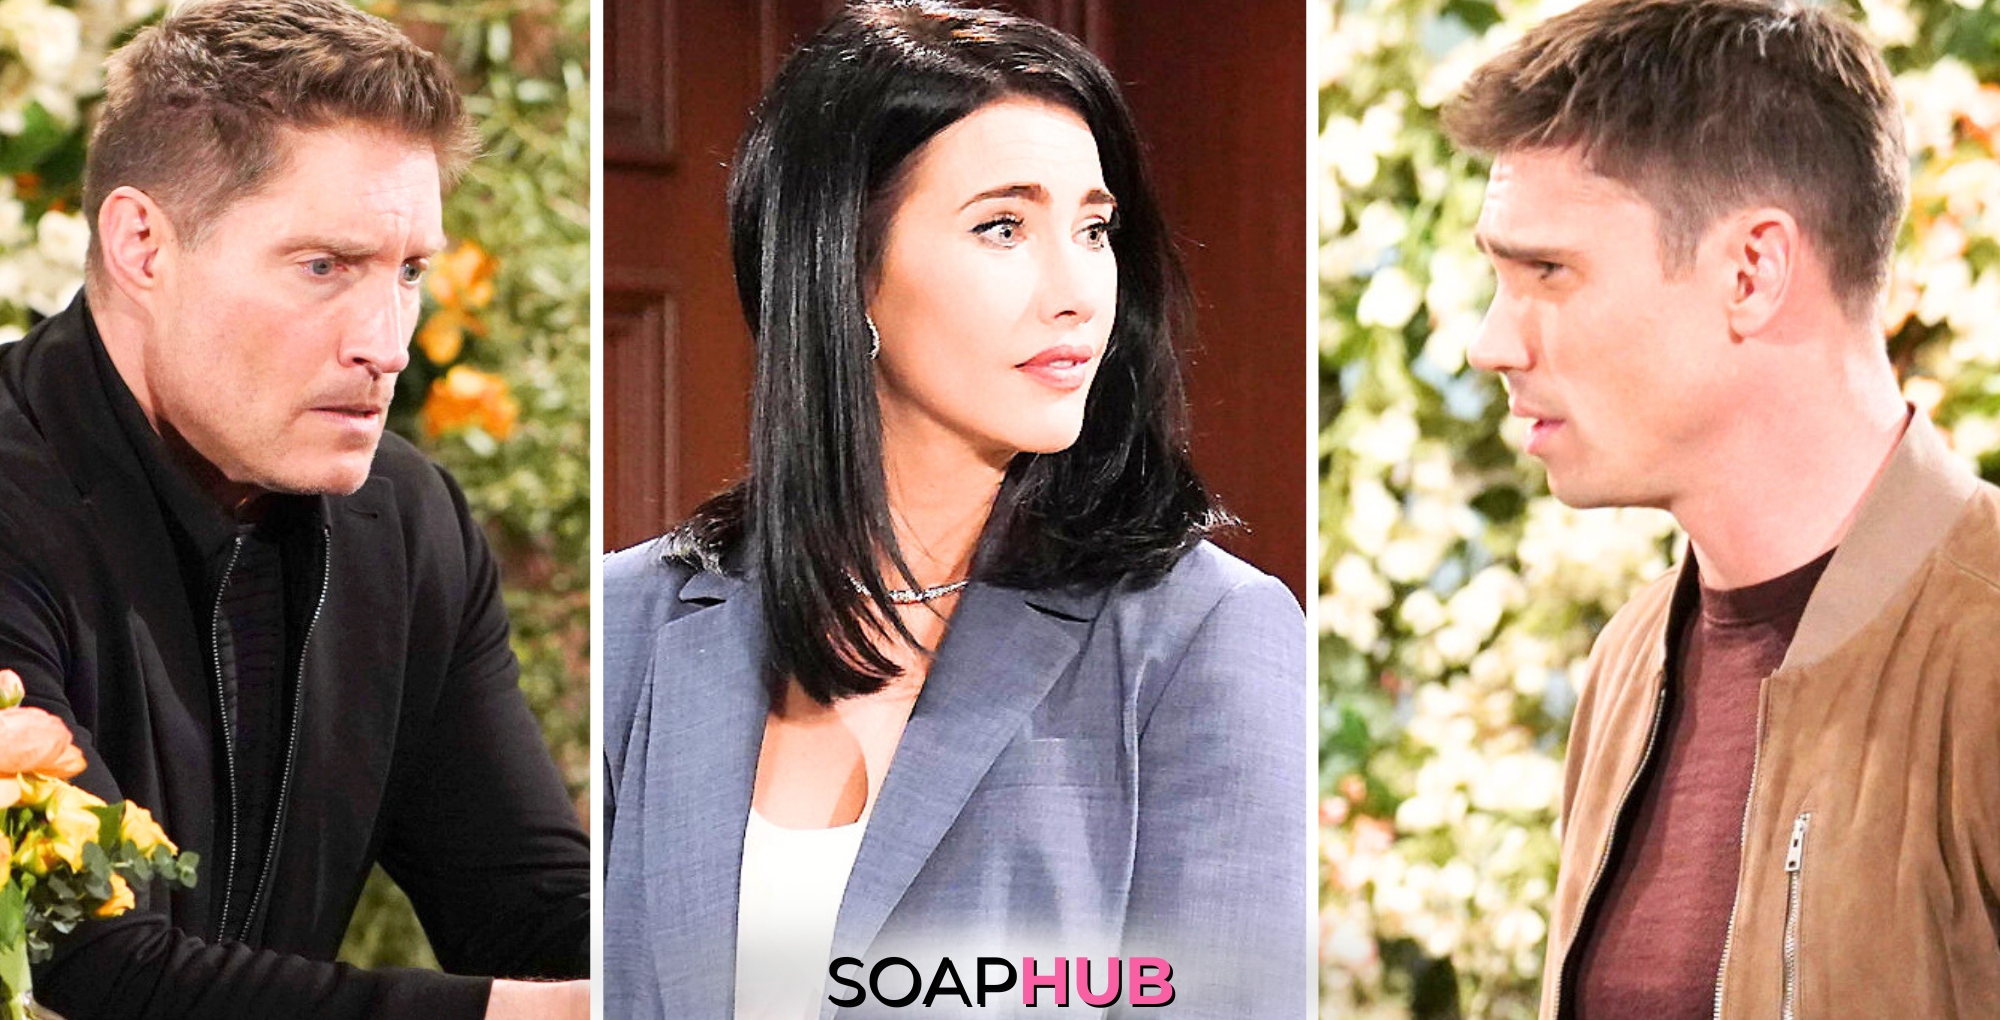 Bold and the Beautiful Spoilers for the Week of April 15 -- 19 Feature Deacon, Steffy and Finn with the Soap Hub Logo Across the Bottom.